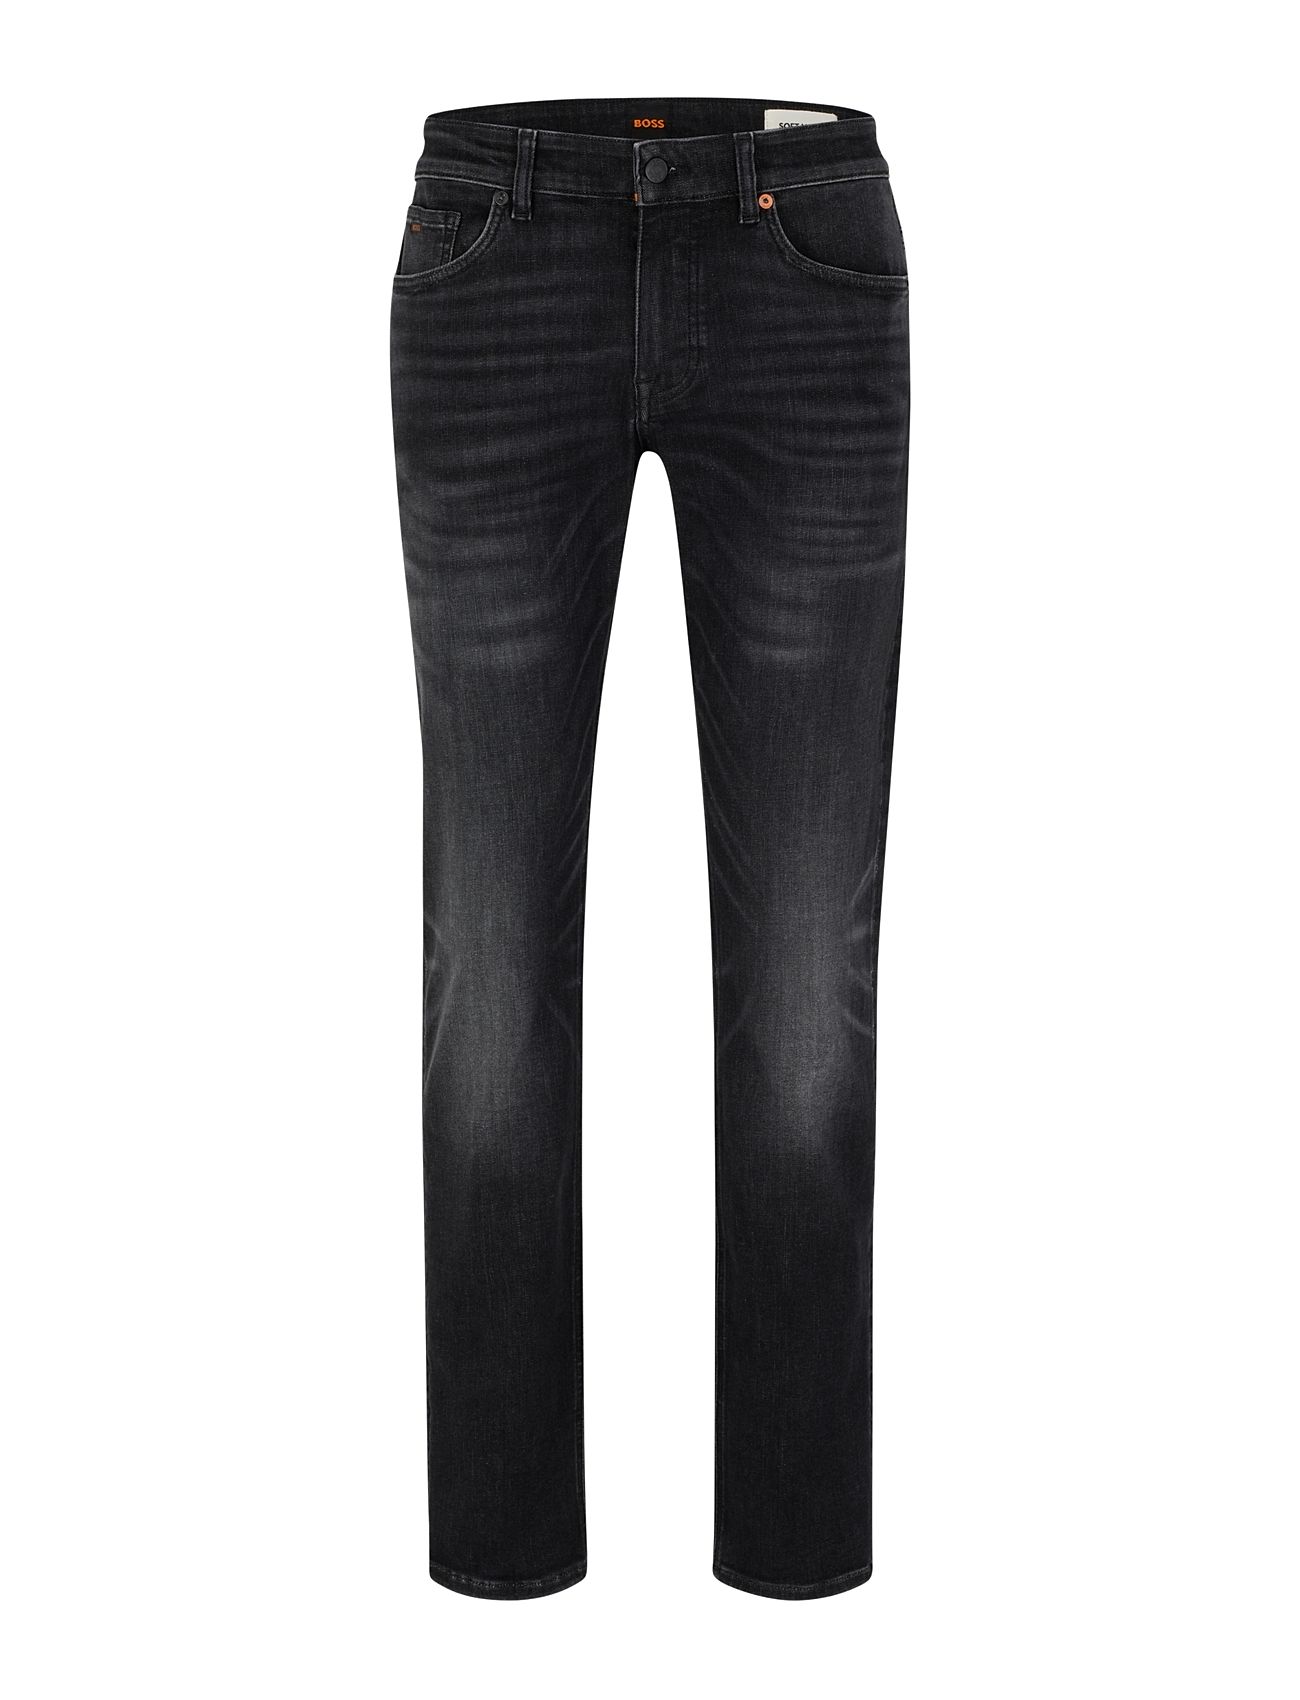 BOSS Delaware Bc-l-p (Charcoal), (88.17 €) Large selection of outlet-styles | Booztlet.com